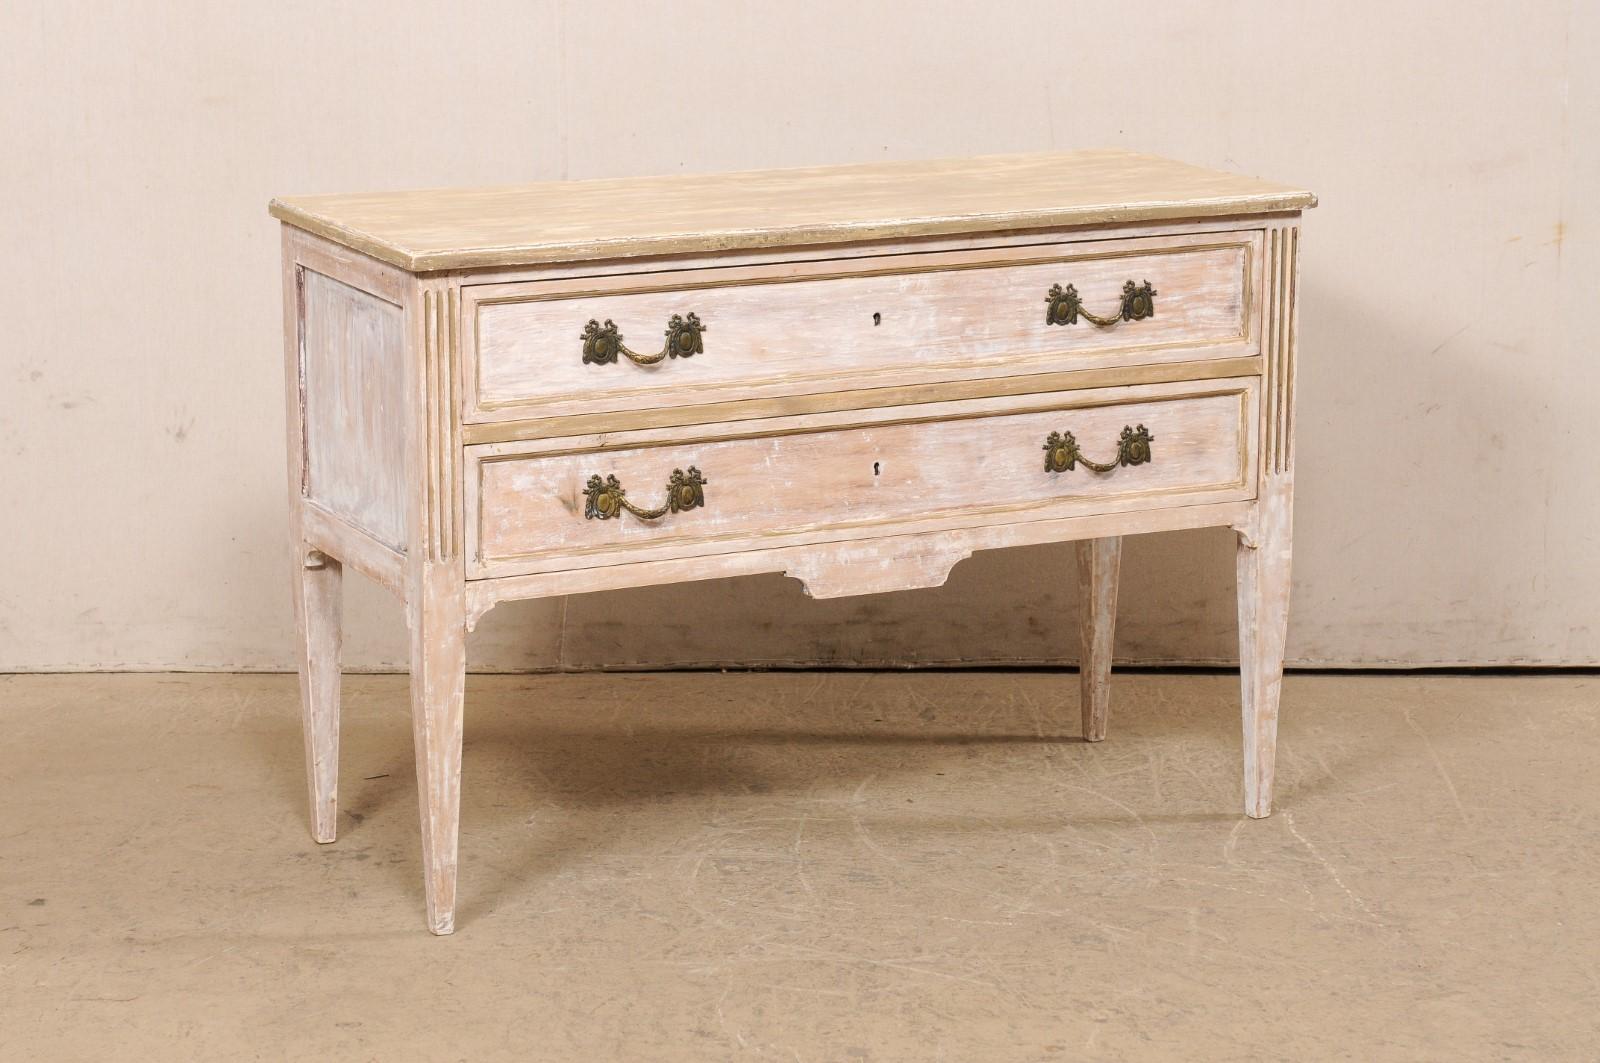 An Italian Neoclassic style raised two-drawer chest of drawers from the mid 20th century. This vintage chest from Italy features a rectangular-shaped top, which slightly overhangs the case below, which houses two drawers fitted with lovely